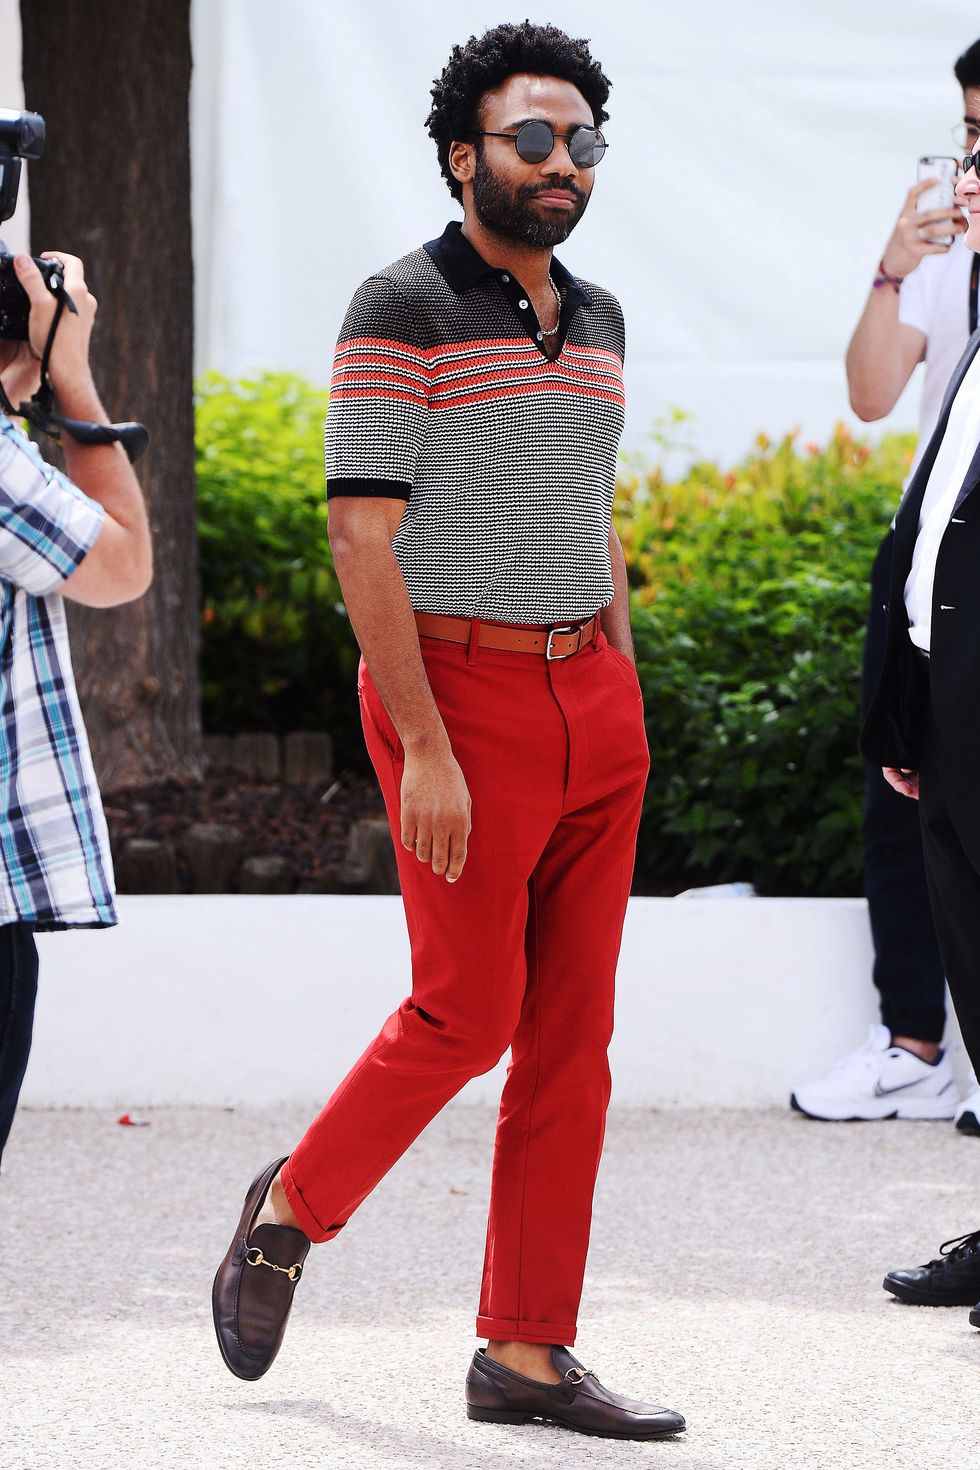 Donald Glover Style - Donald Glover Best Fashion Outfits